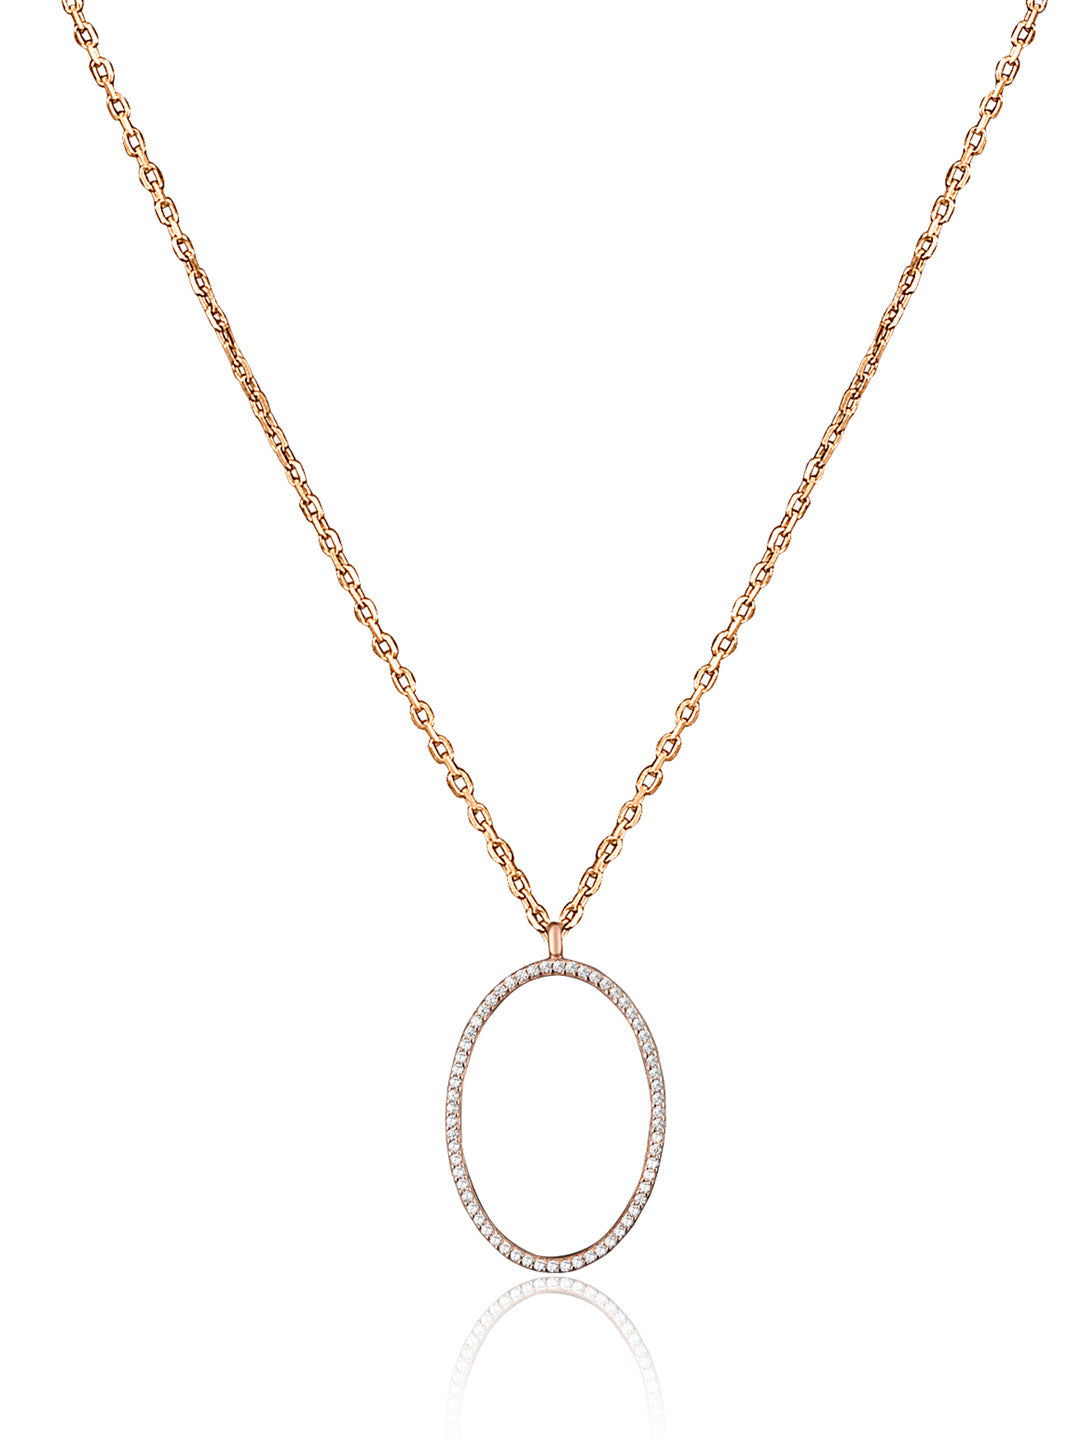 Pure Silver Loop Necklace Embellished With Cubic Zirconia Stones 